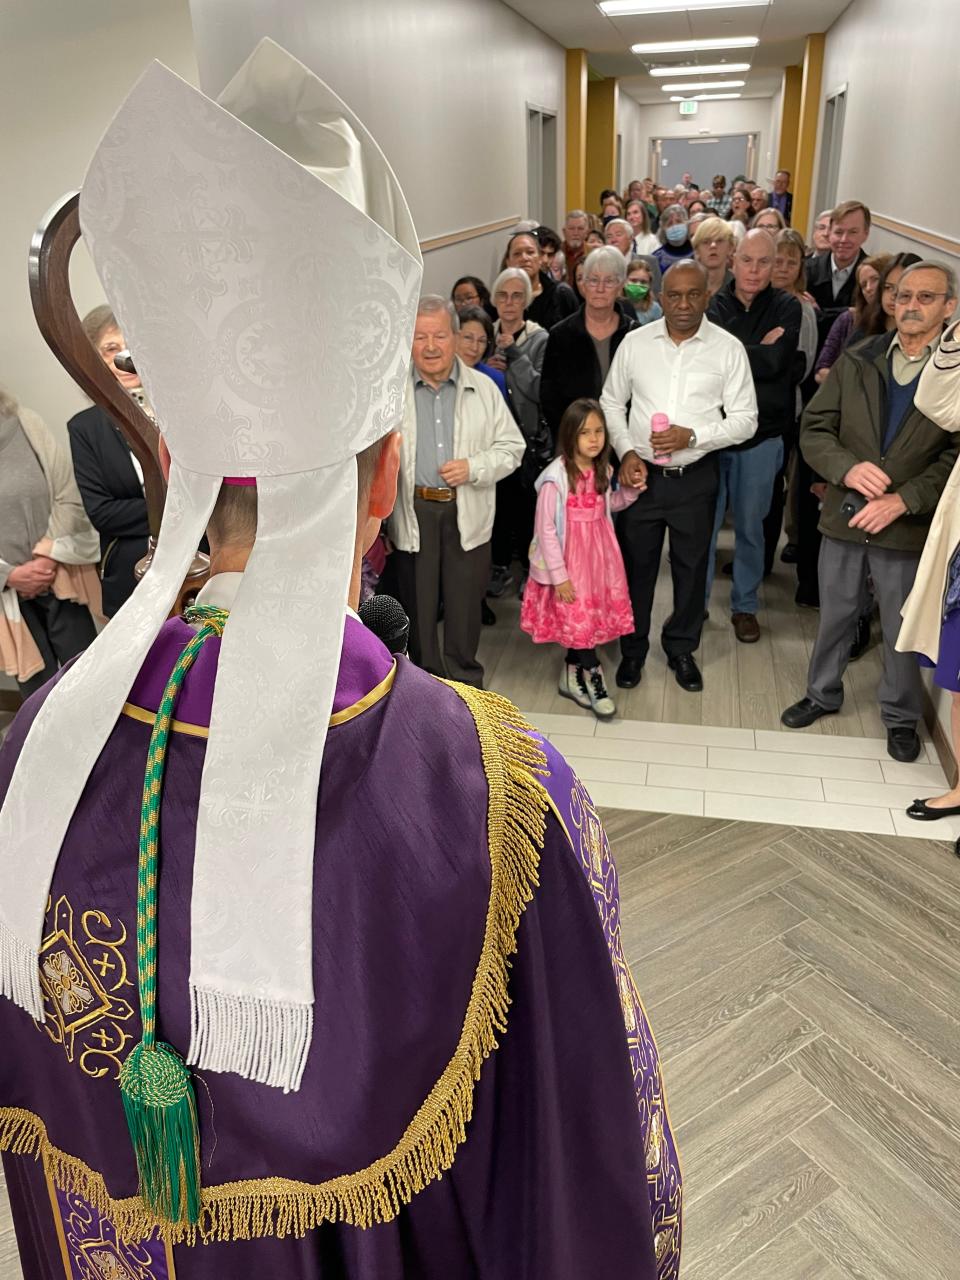 Bishop Stephen D. Parkes of the Diocese of Savannah speaks to parishioners in the new education wing at St. Teresa of Avila Catholic Church in Grovetown on Sunday.